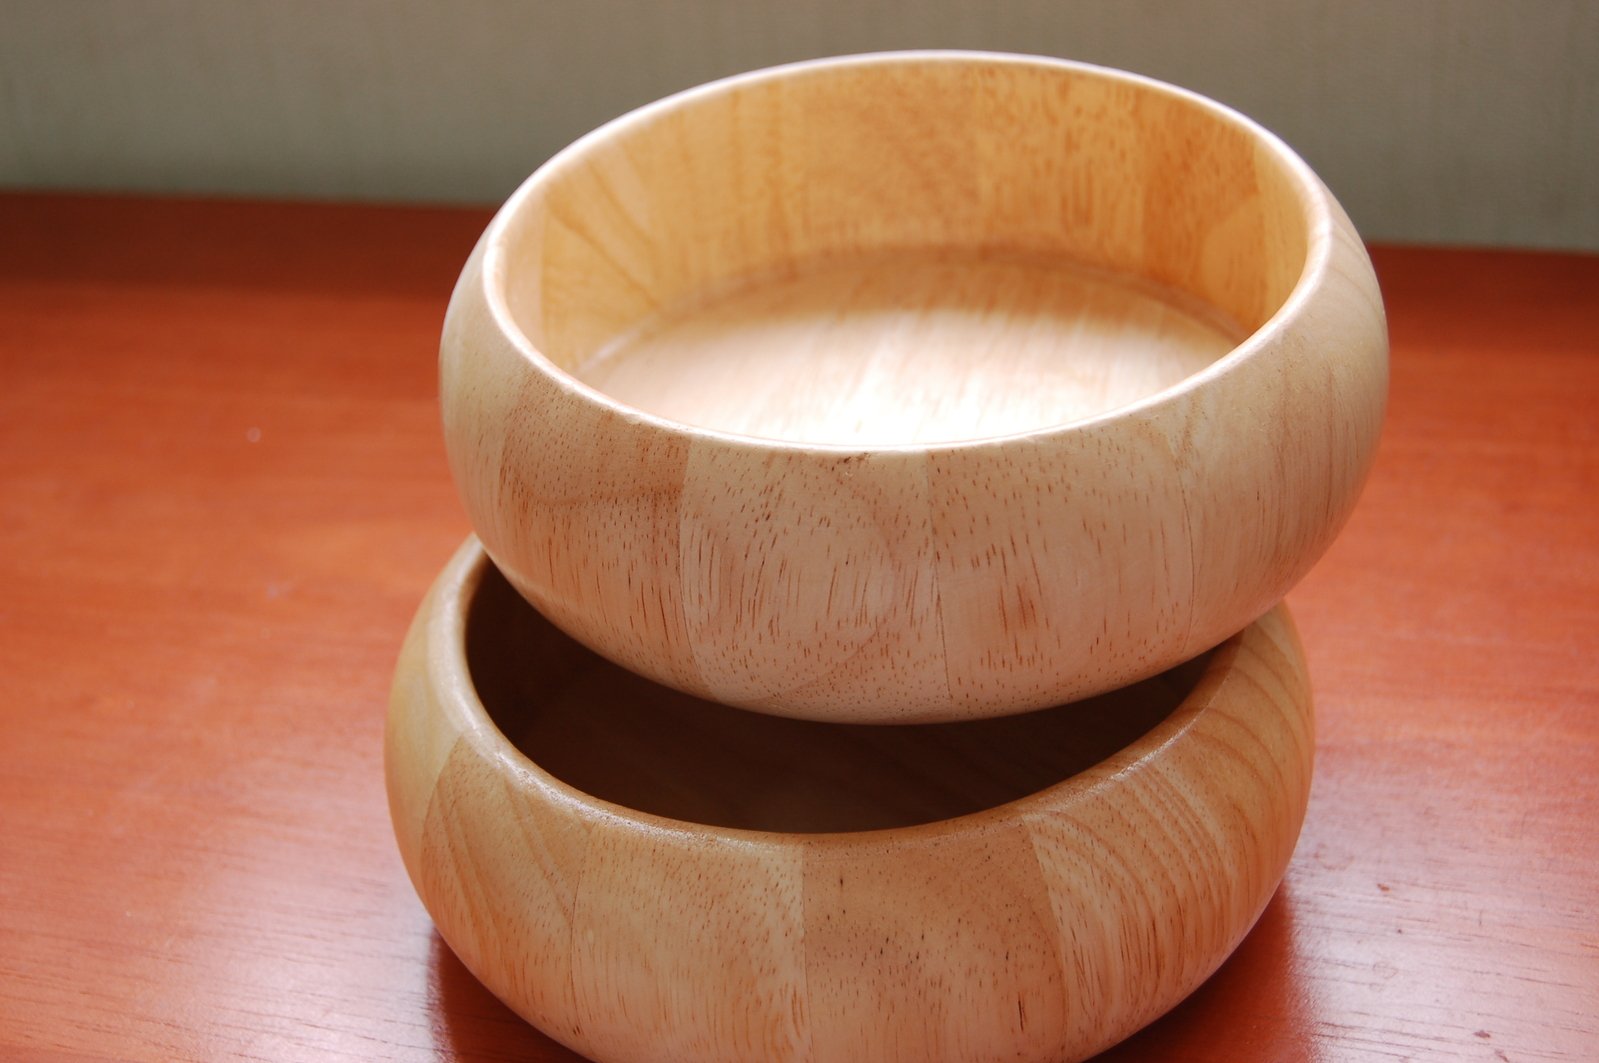 a close up view of two bowls on a wooden table